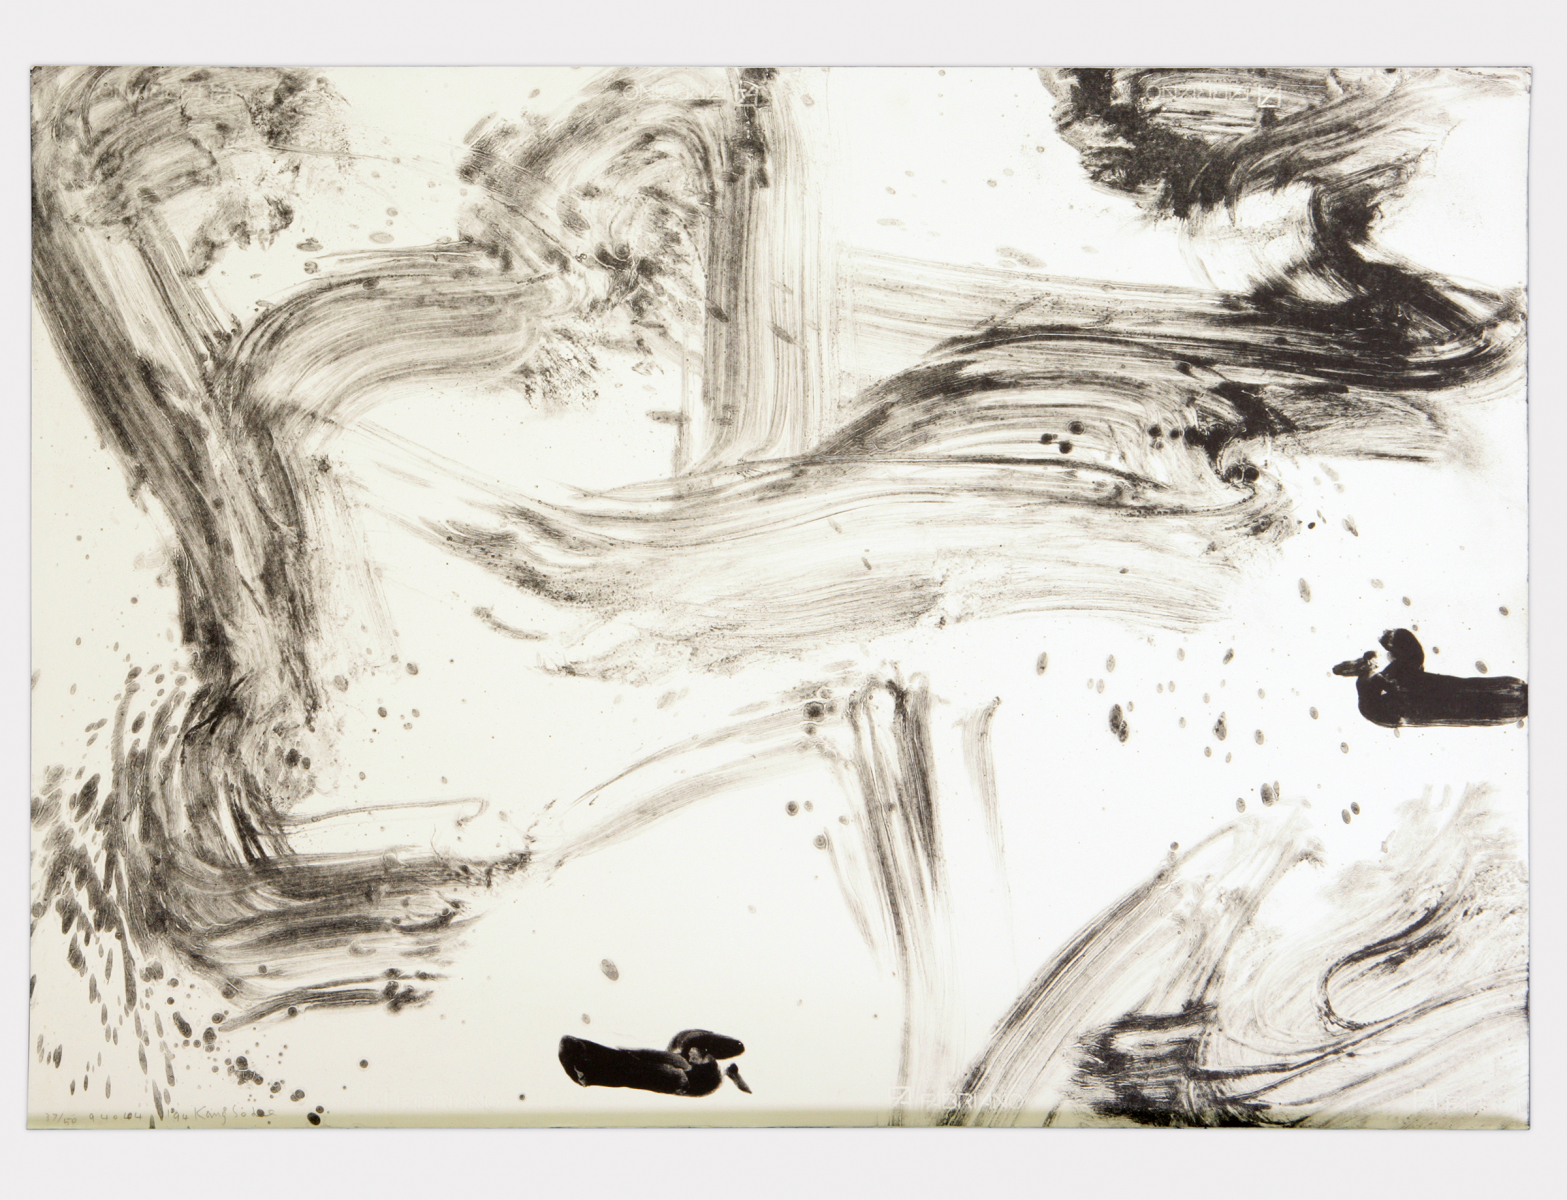 Untitled-94044, 1994, Lithography, 100x70cm